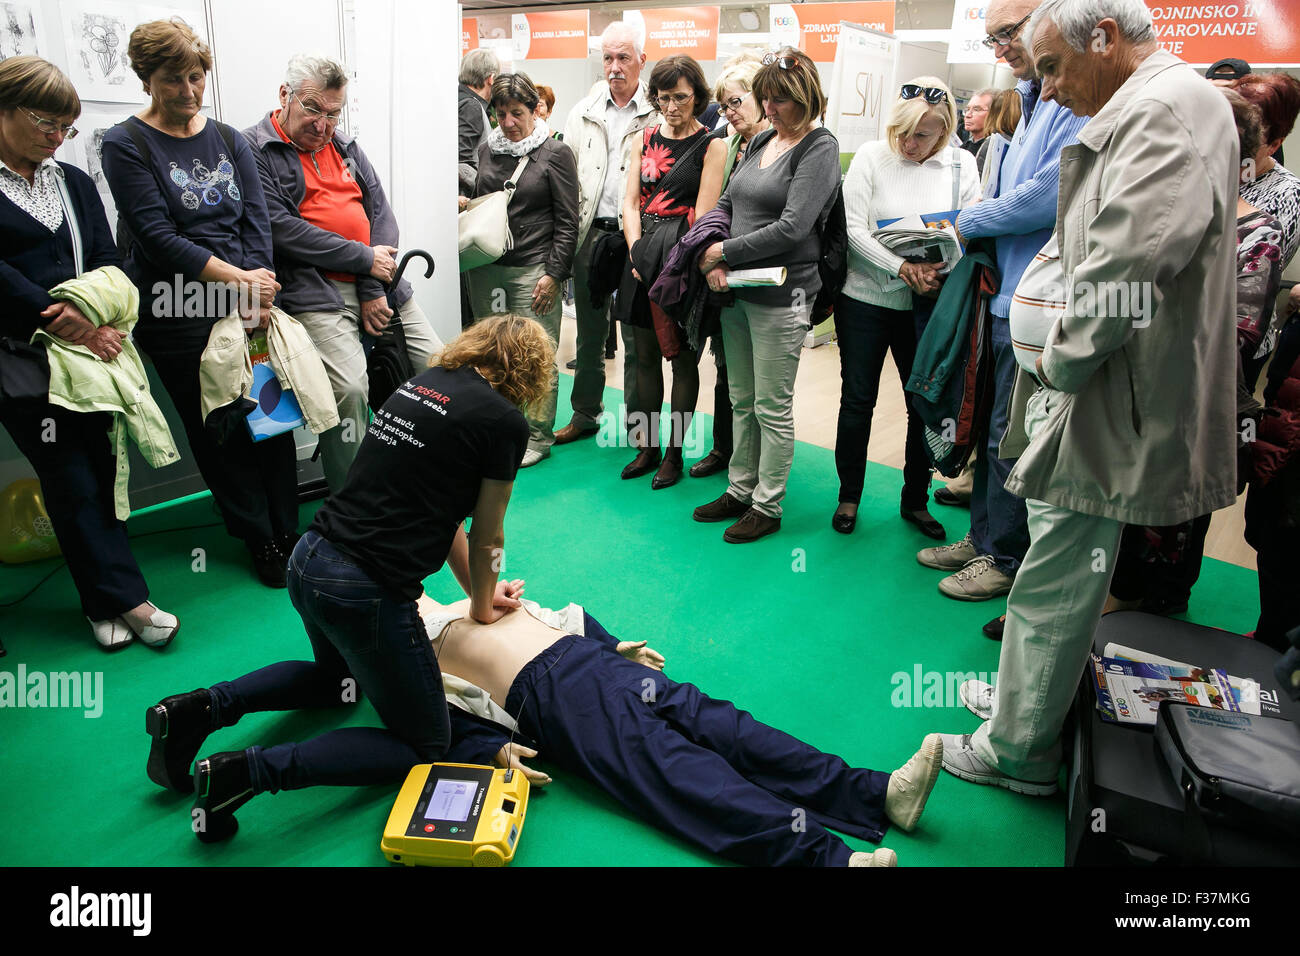 (151001) -- LJUBLJANA, Oct. 1, 2015 (Xinhua) -- A woman from the Ljubljana health centre demonstrates the use of a defibrillator and CPR at the 15th Festival for Third Age in Ljubljana, Slovenia, Sept. 30, 2015. The Festival for Third Age in Ljubljana, the largest of its kind in Europe, is a unique three-day event for the elderly, dedicated to active aging, the improvement of quality of life and solidarity among generations. It promotes cooperation among generations, the public, volunteers, societies, education and the government. The festival that takes place in Cankarjev dom Culture and Cong Stock Photo